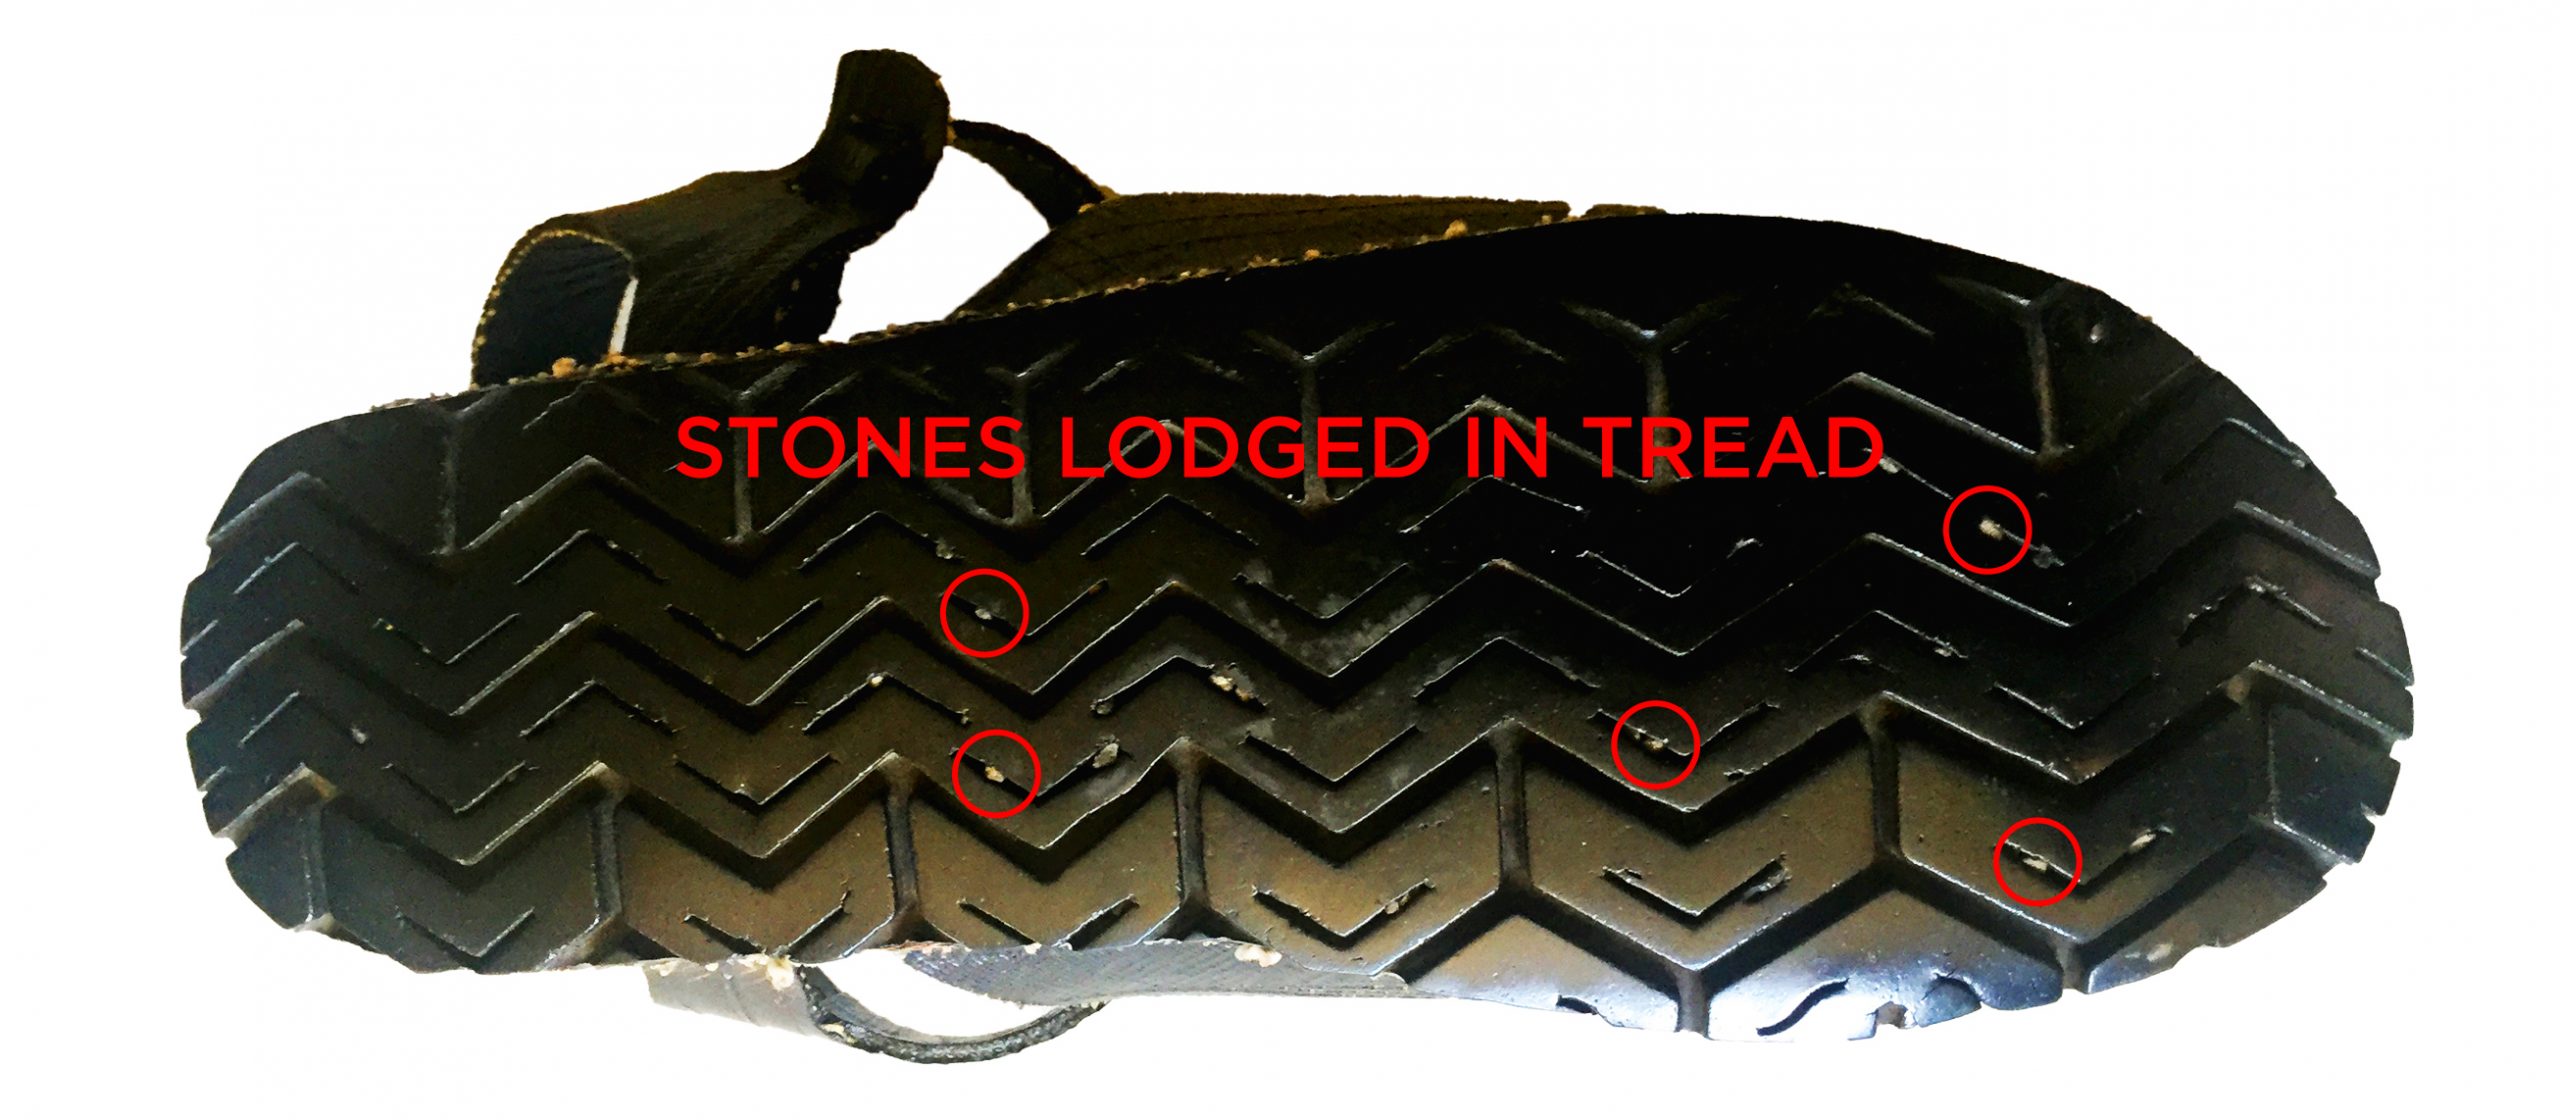 Stone lodged in tread